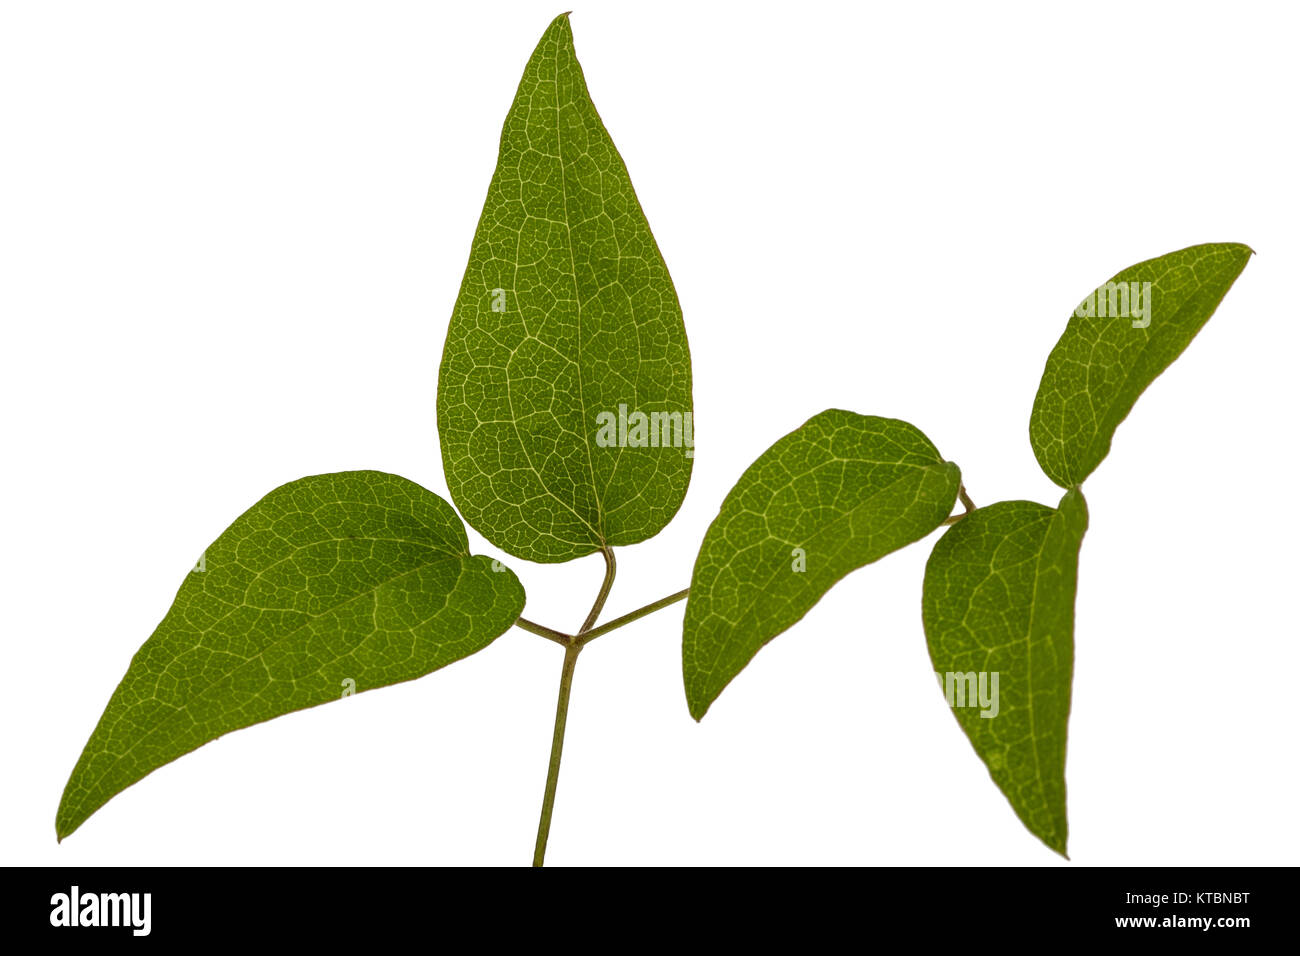 Green leafs of clematis, isolated on white background Stock Photo